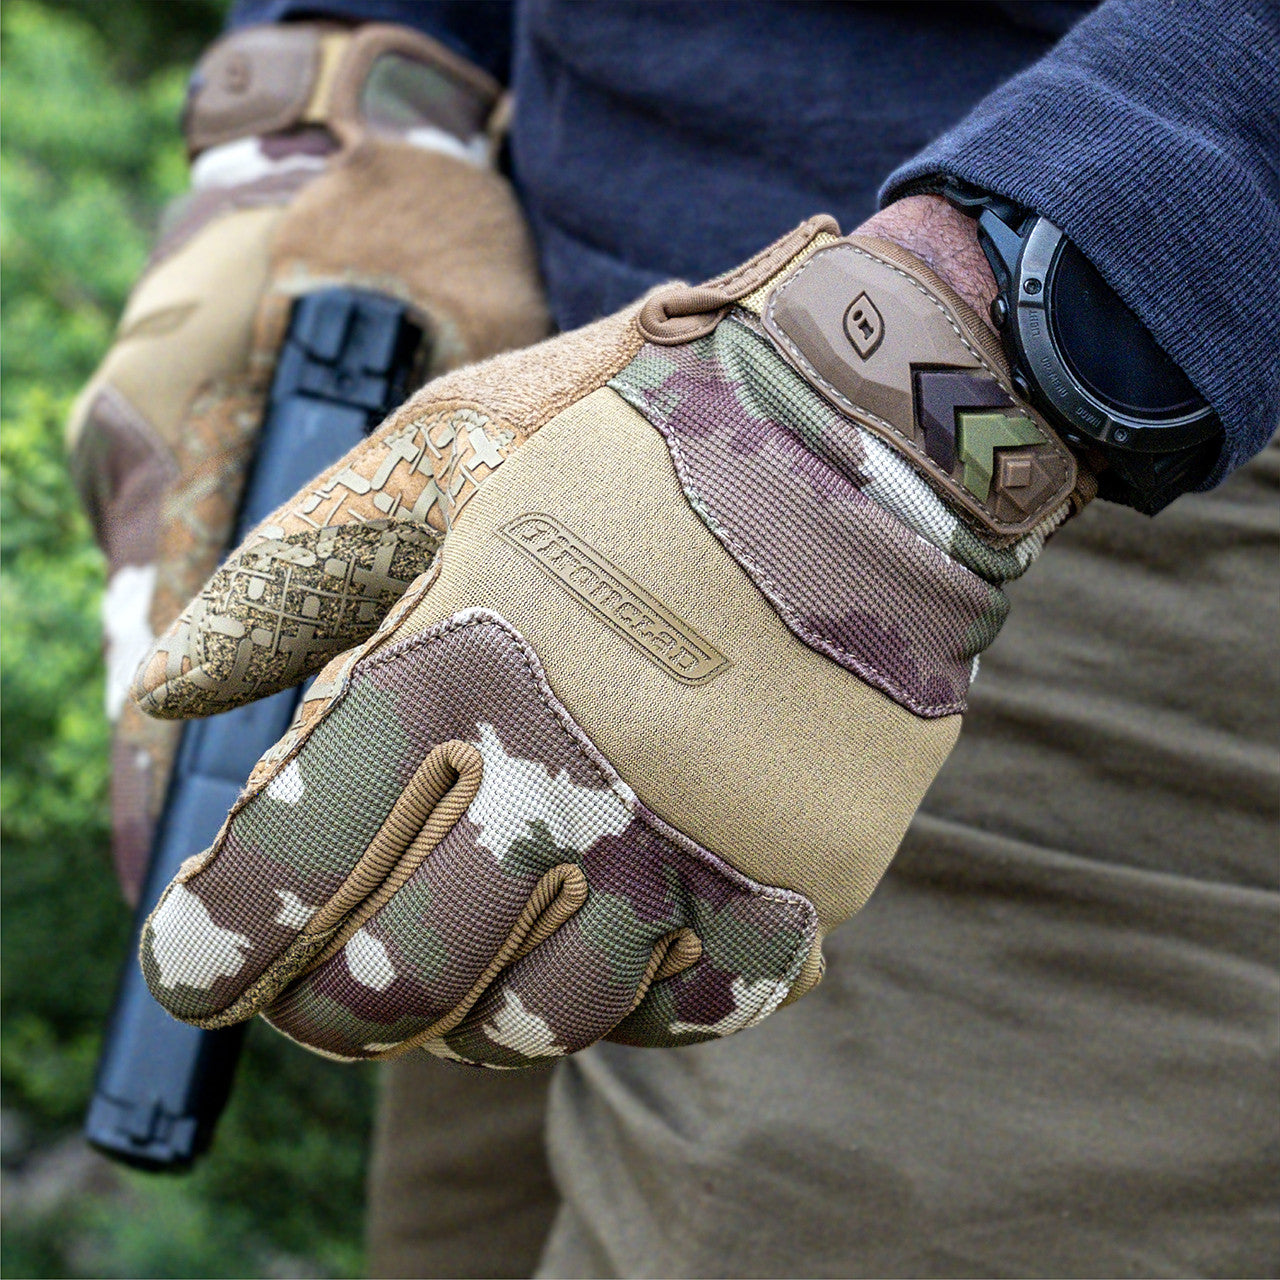 Ironclad Tactical Grip Gloves